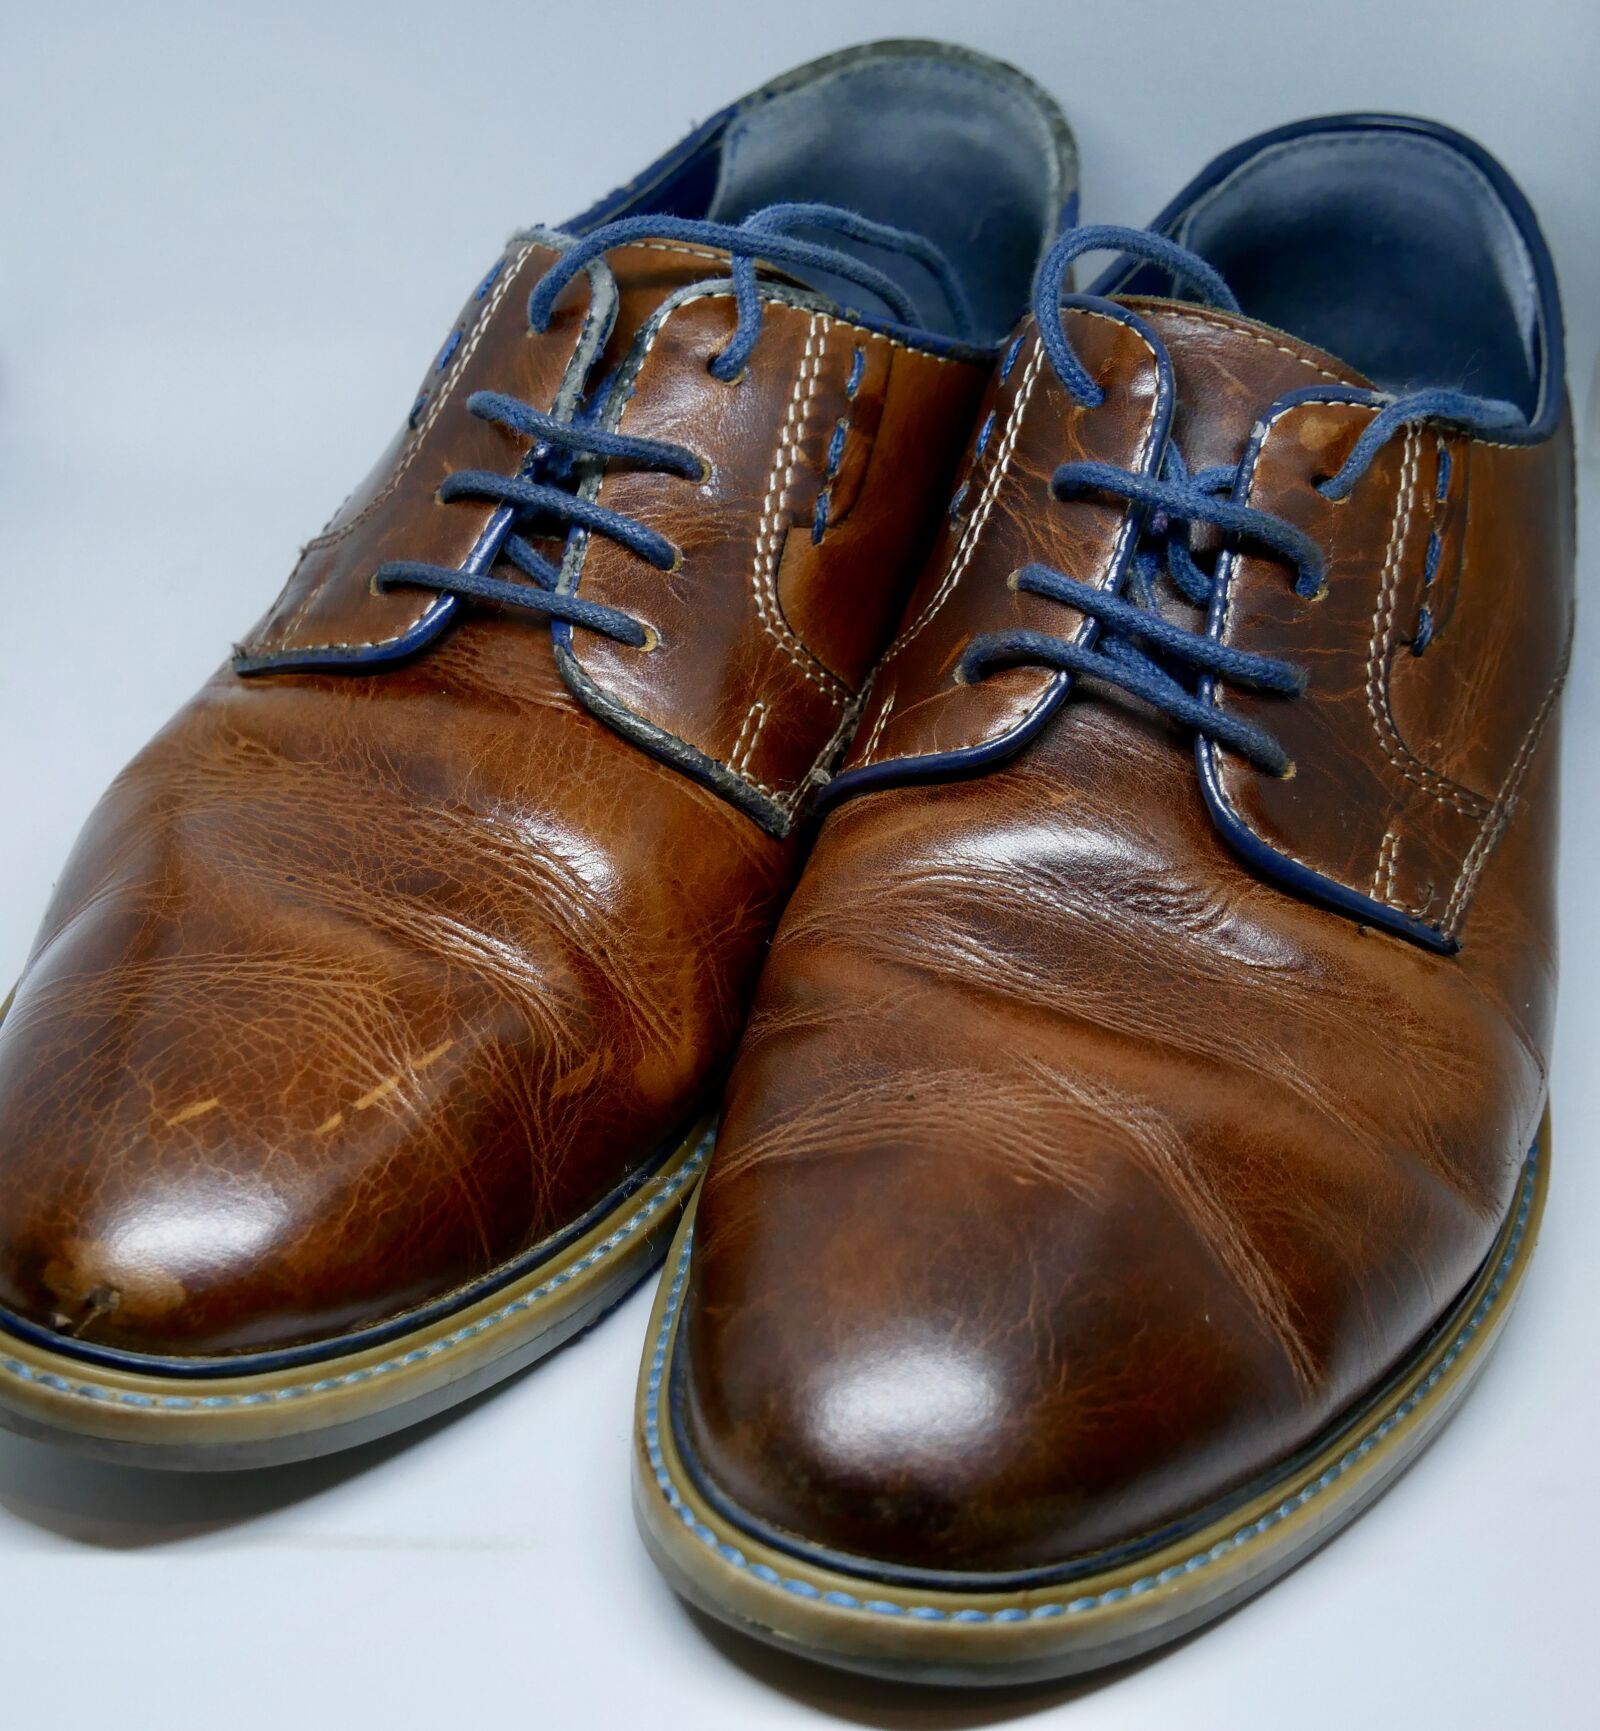 Panasonic Lumix DMC-GX85 (Lumix DMC-GX80 / Lumix DMC-GX7 Mark II) sample photo. Shoes, men's shoes, brown photography